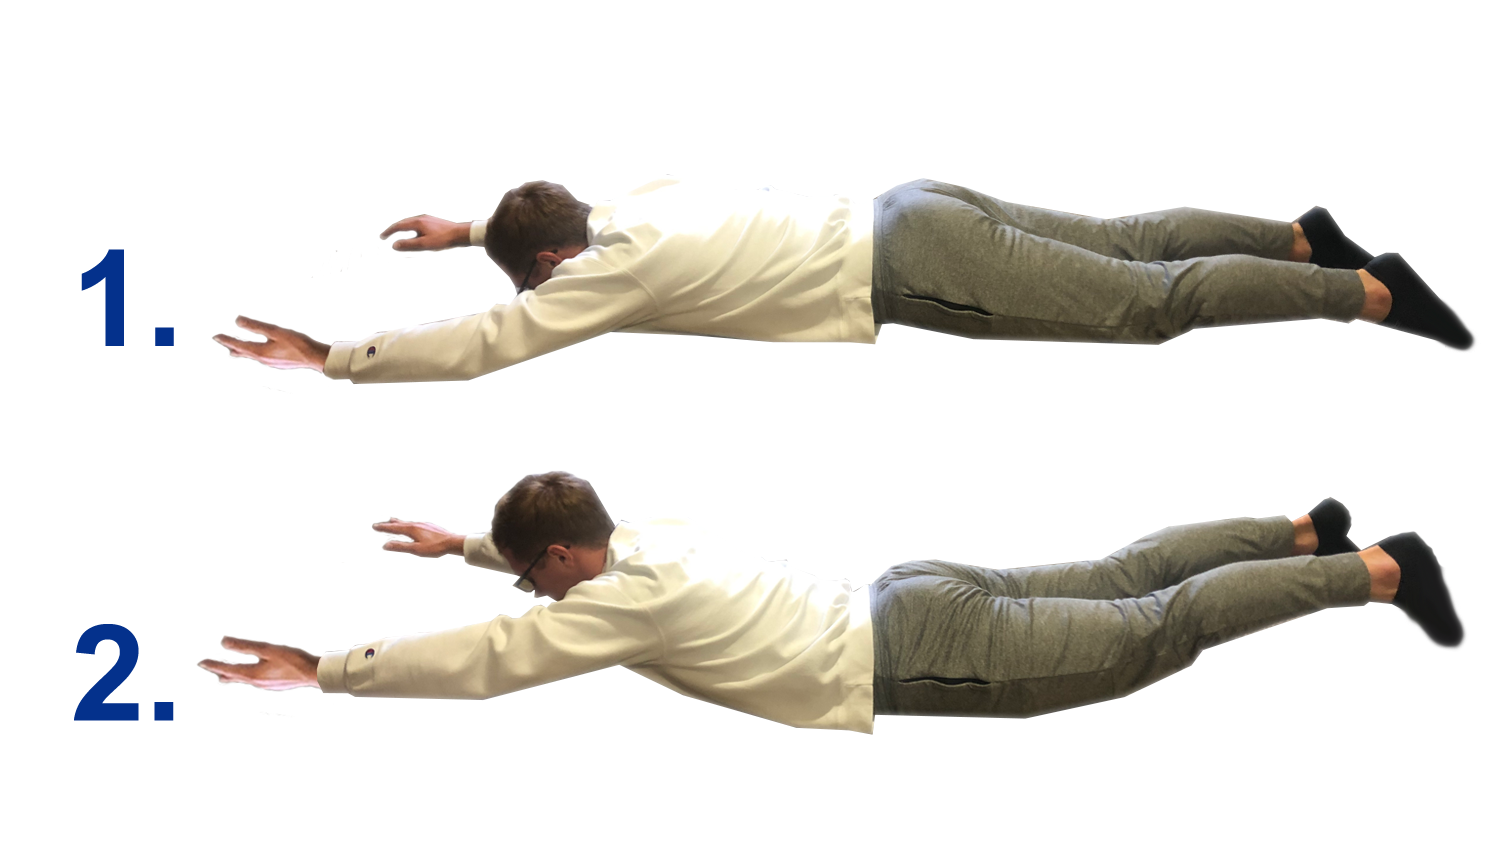 Young man demonstrating the superman exercise. For a complete description, call SDSU Extension at 605-688-4792.